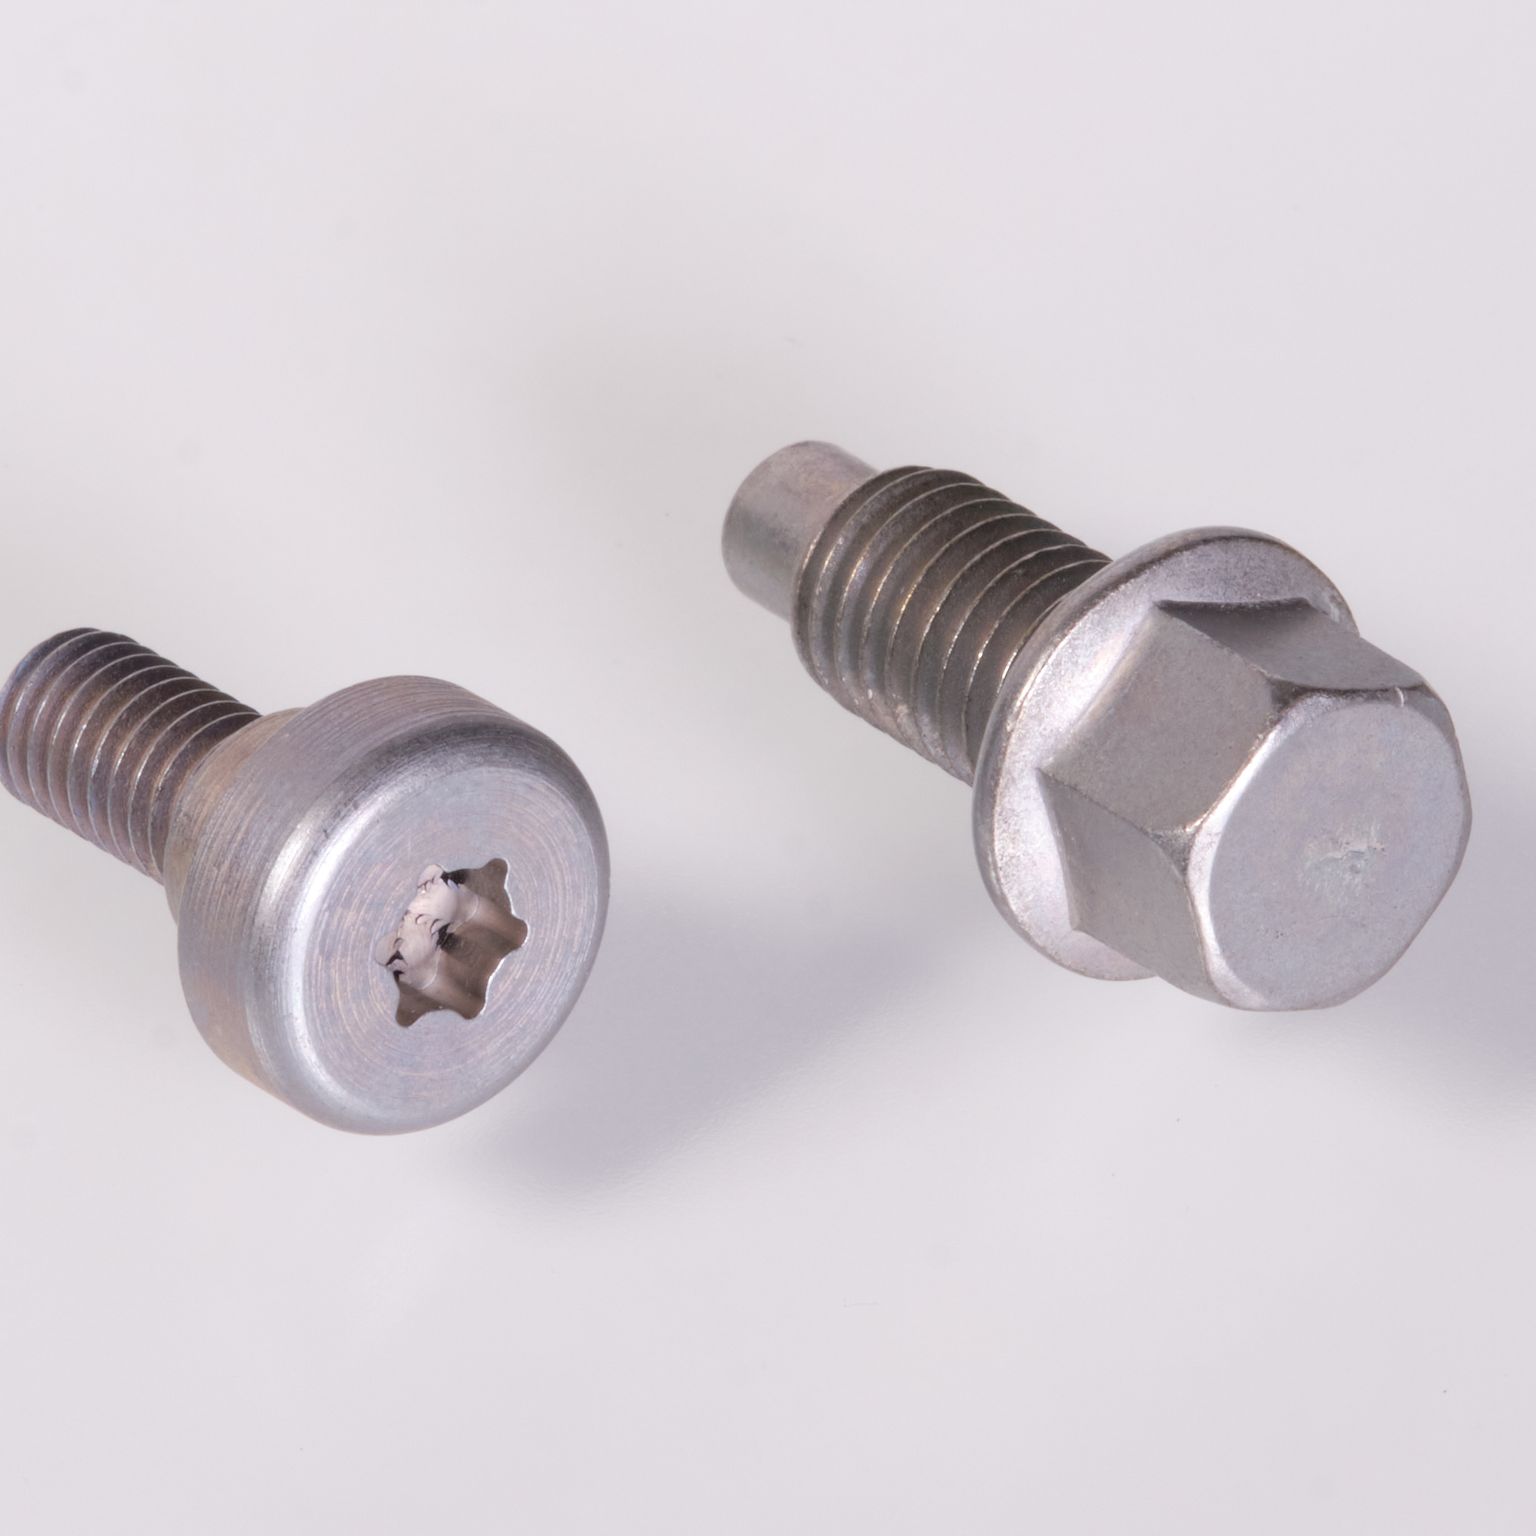 Screws with different head styles